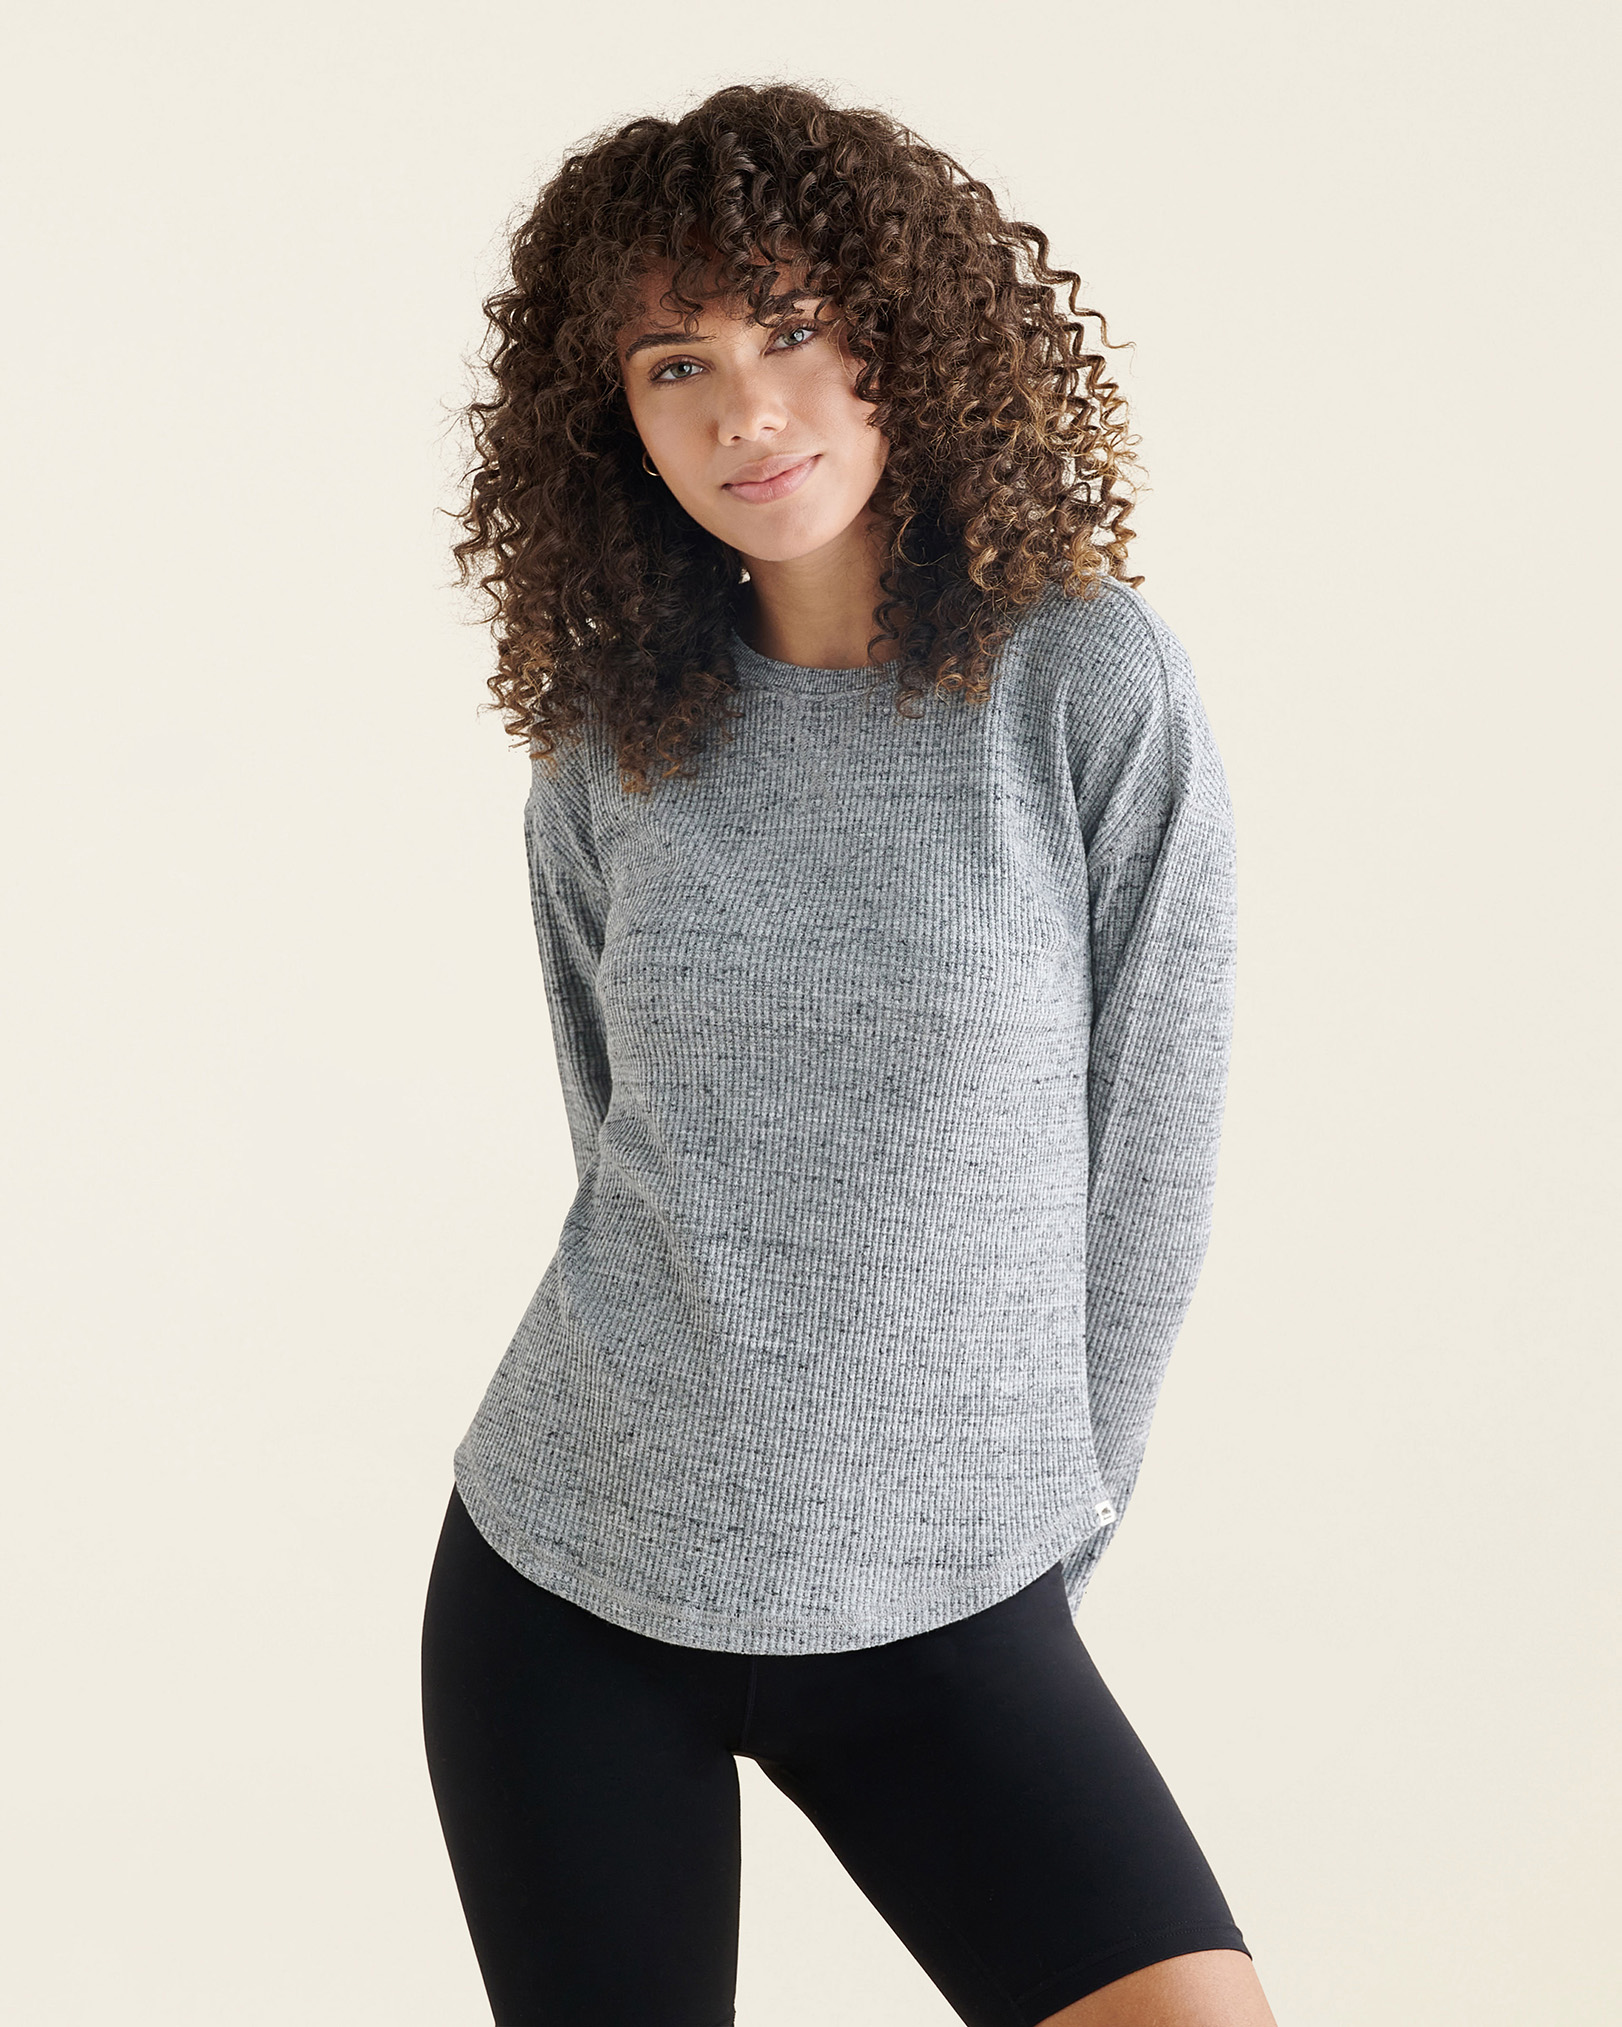 Roots Waffle Long Sleeve Top in Salt/Pepper